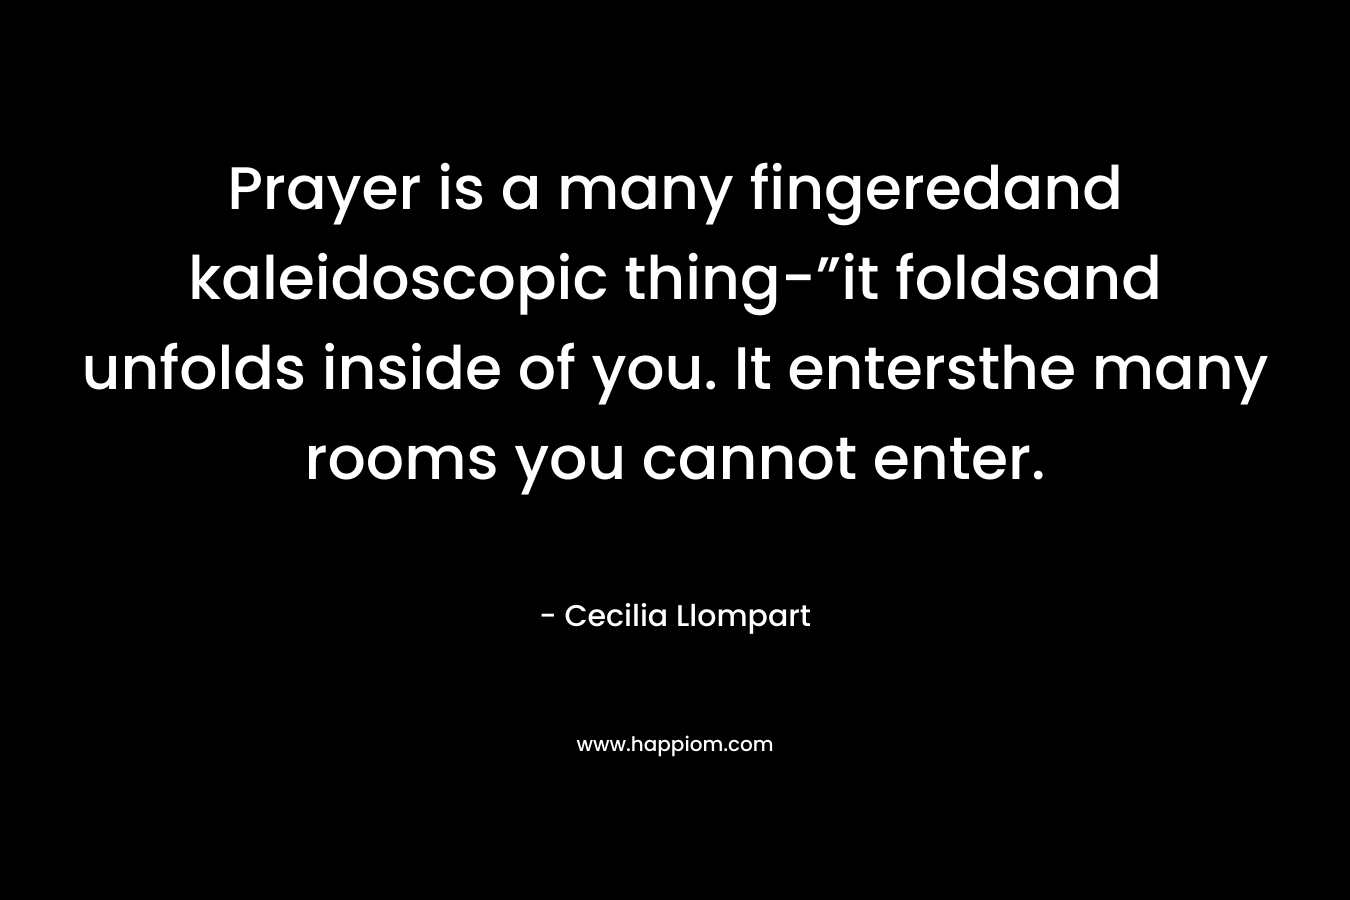 Prayer is a many fingeredand kaleidoscopic thing-”it foldsand unfolds inside of you. It entersthe many rooms you cannot enter. – Cecilia Llompart